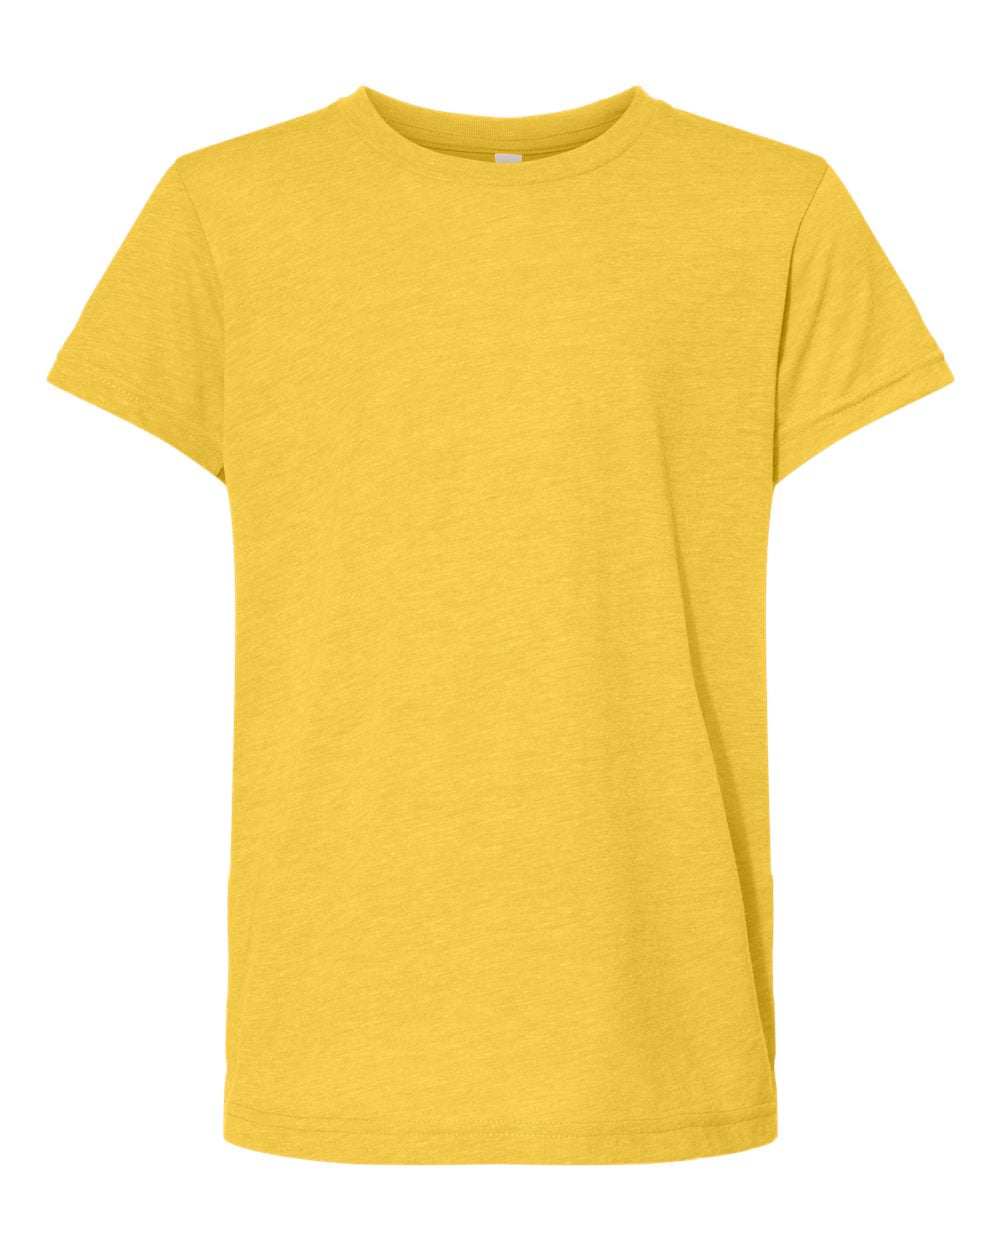 Bella + Canvas Youth Triblend Tee (3413y) in Yellow Gold Triblend